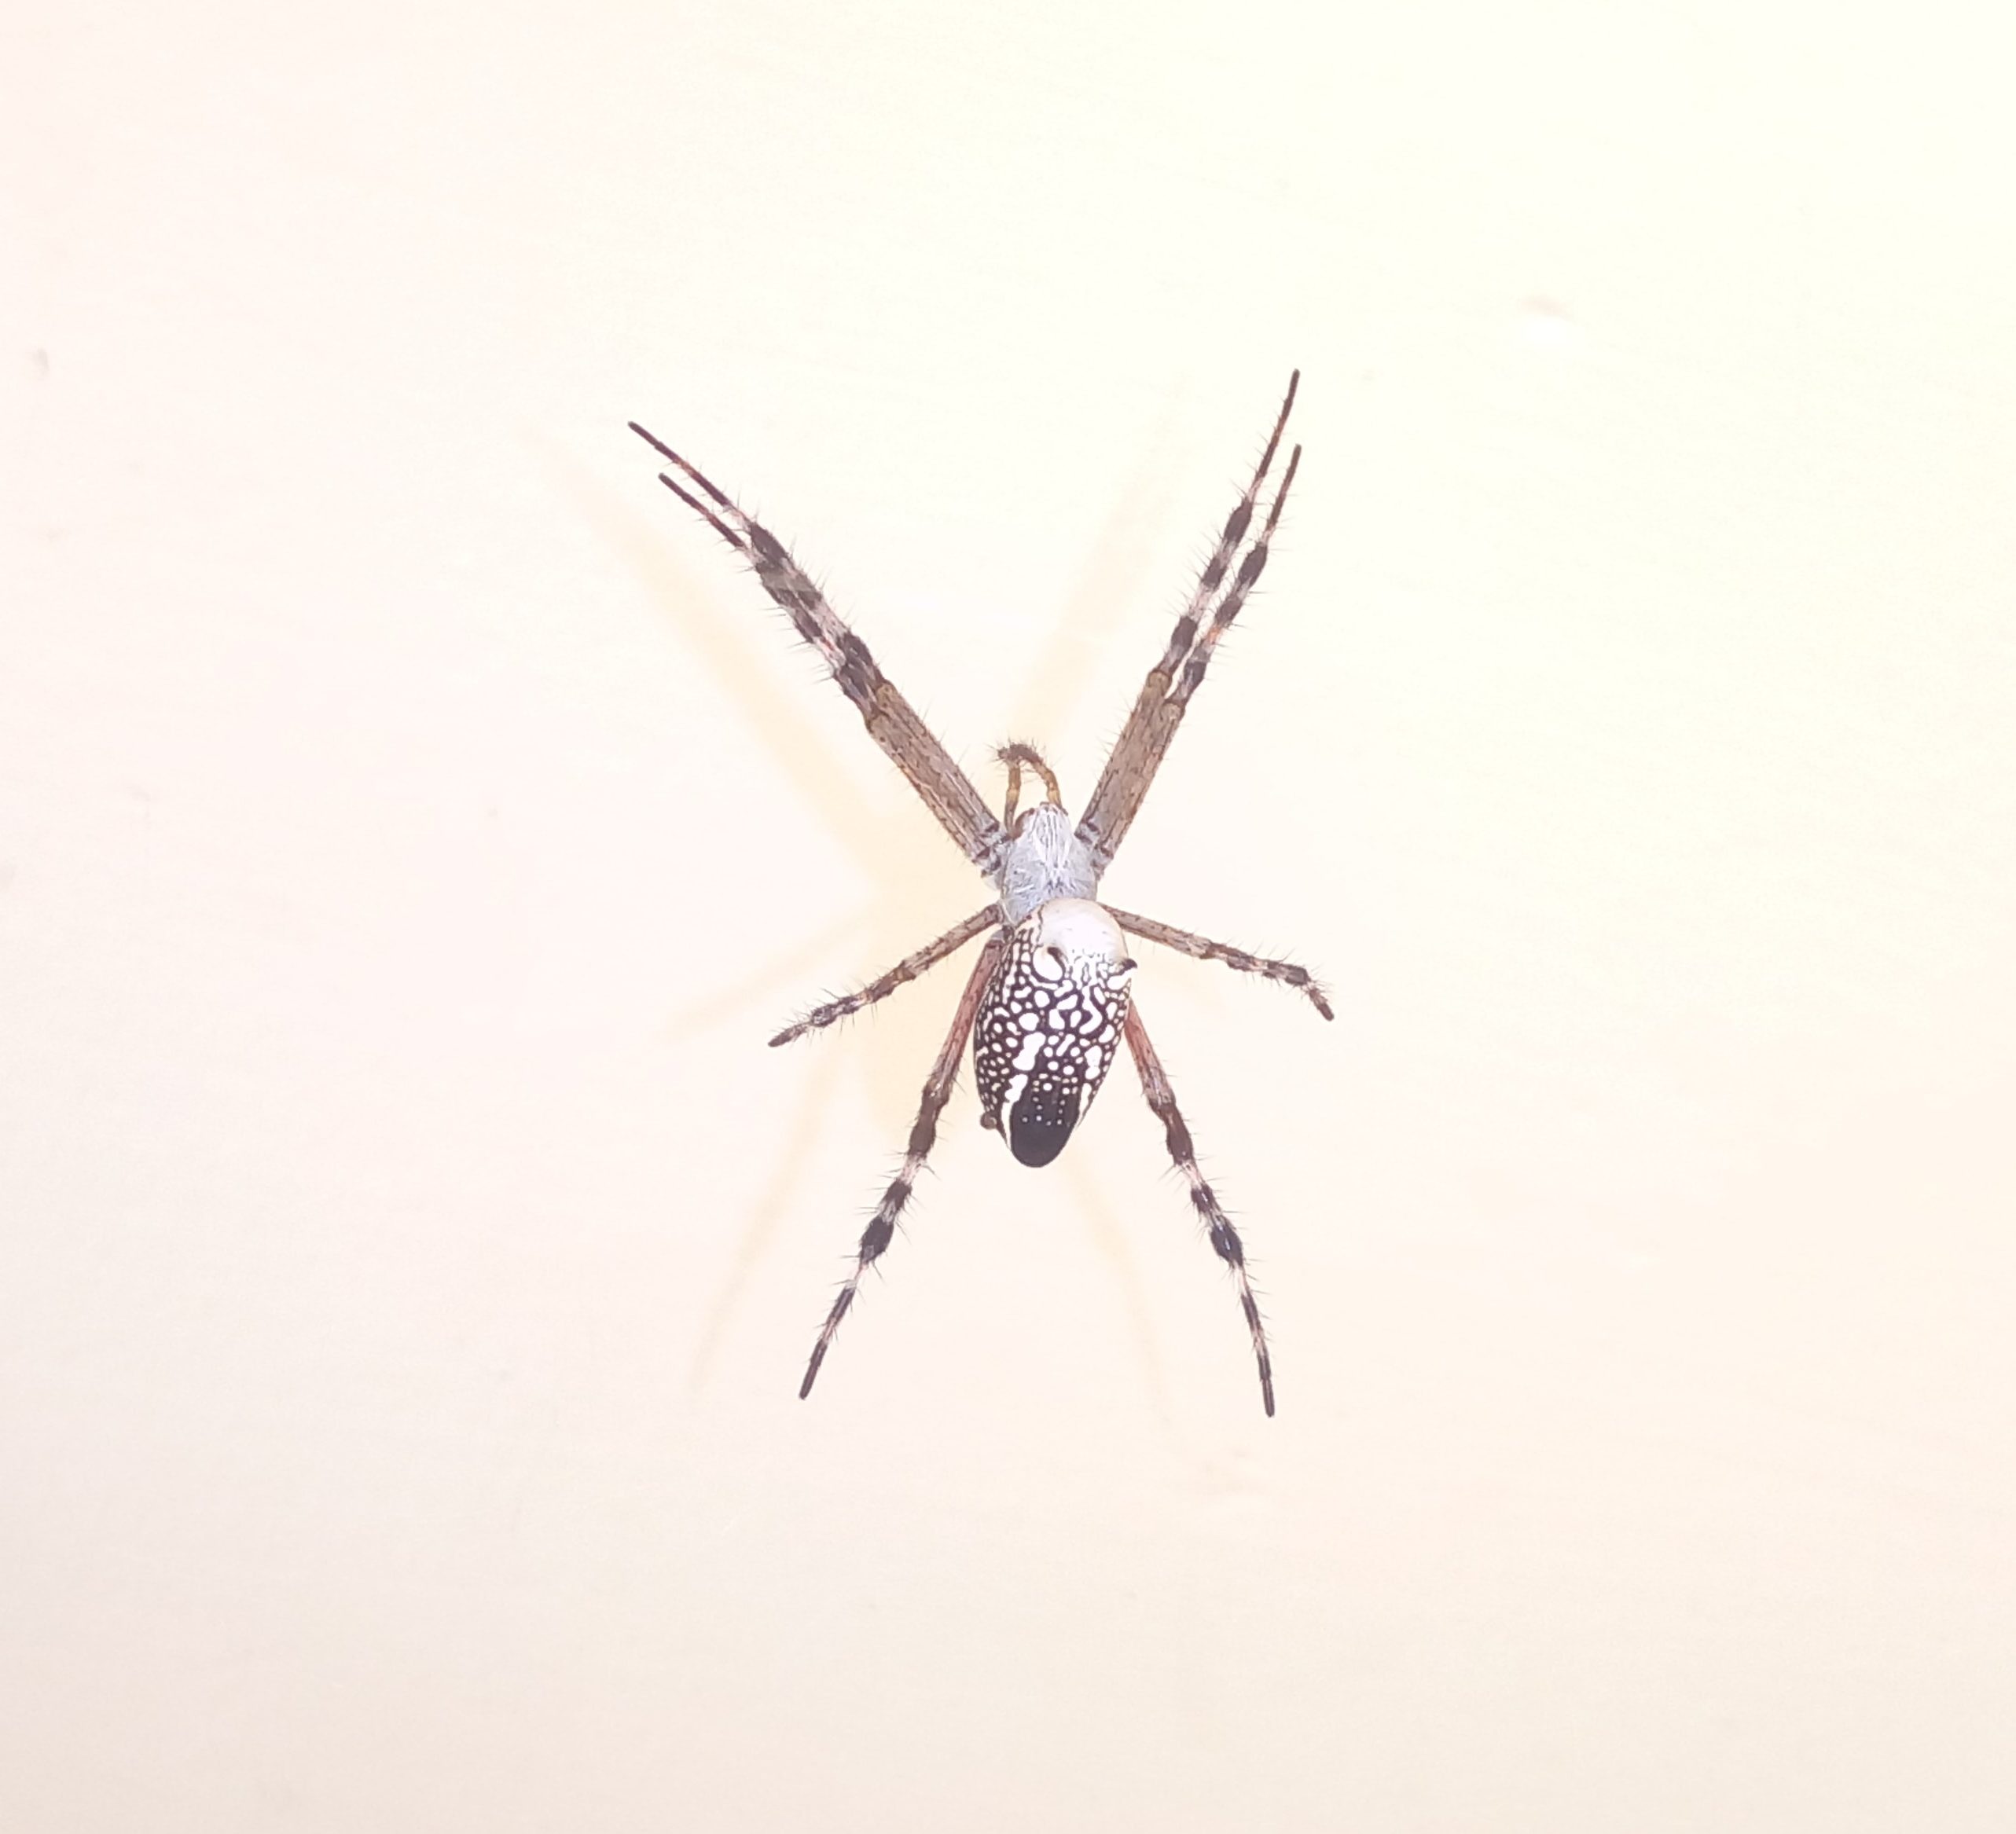 Picture of Cyrtophora moluccensis (Dome Tent Spider) - Dorsal